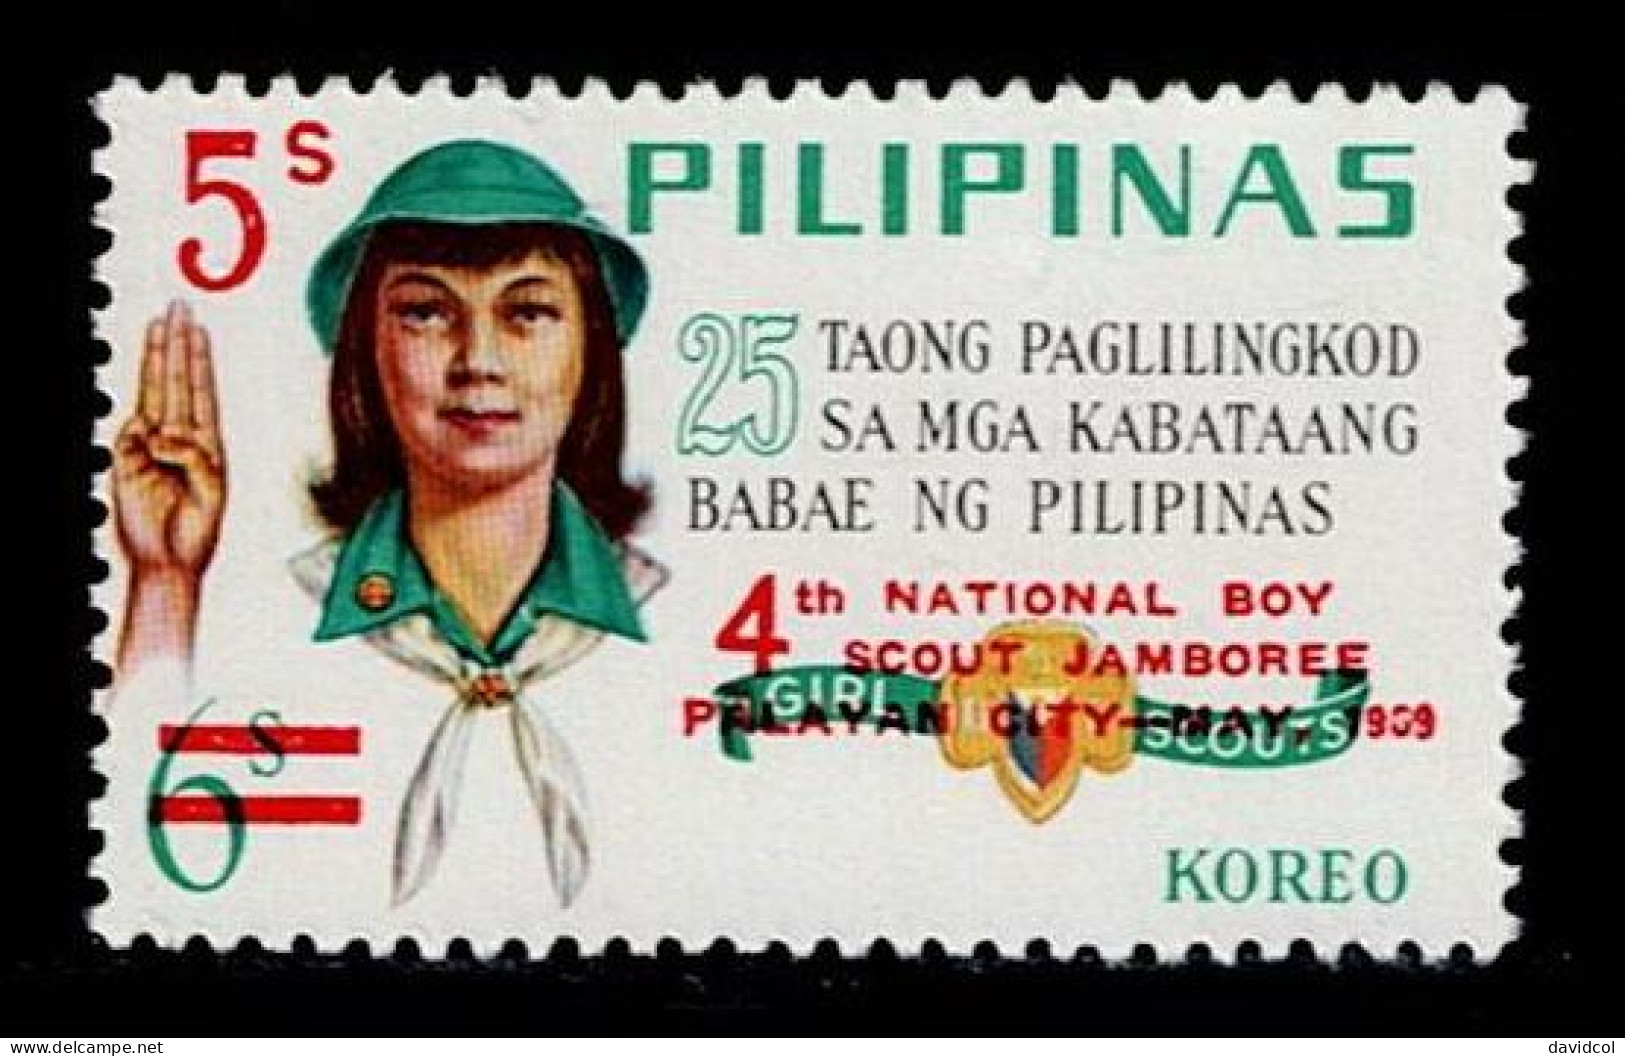 FIL-17- PHILIPPINES - 1969 - MNH -SCOUTS- 4TH NATIONAL BOY SCOUT JAMBOREE - Philippinen